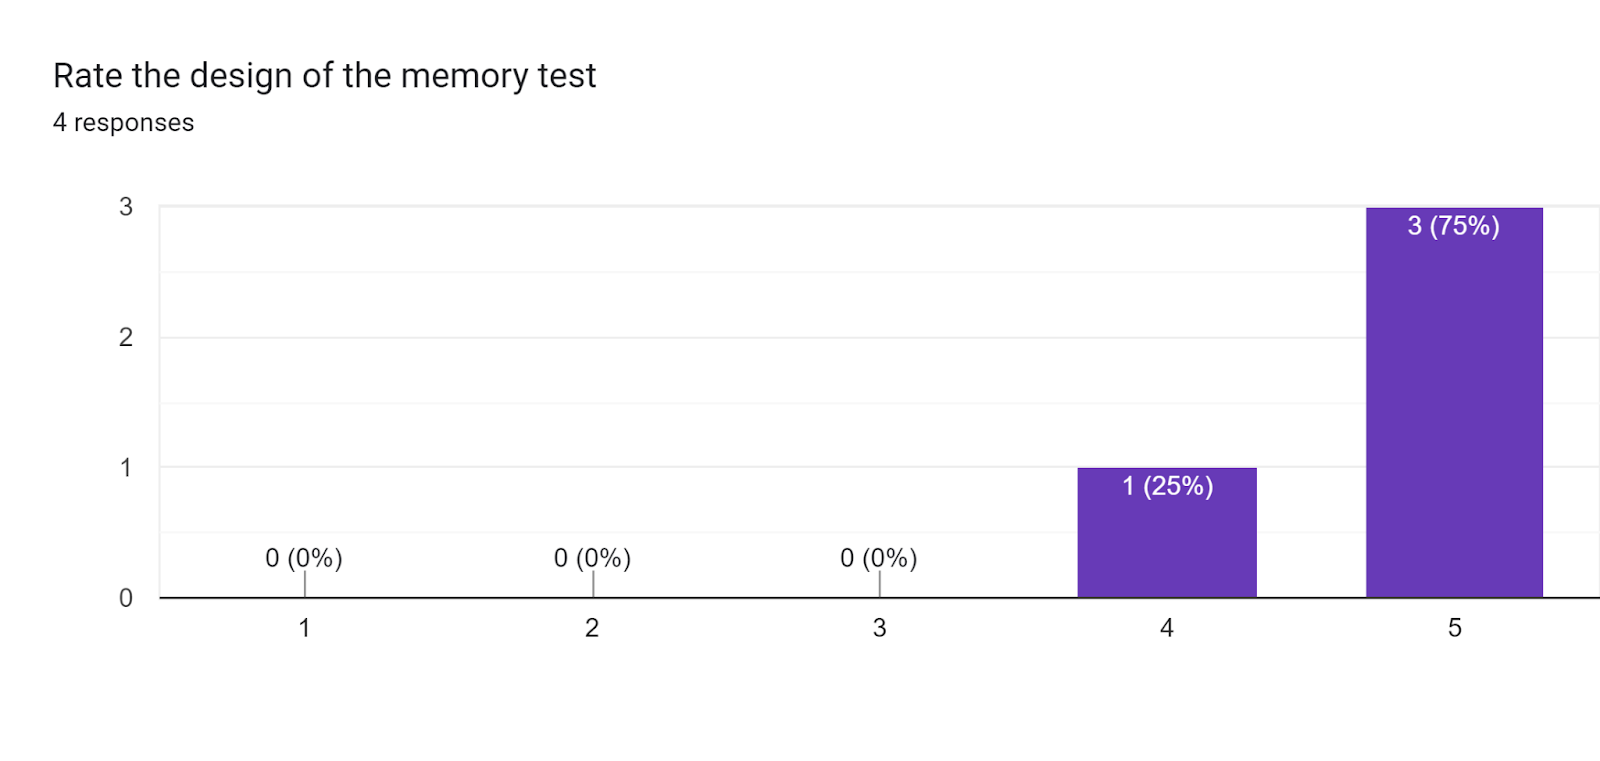 Forms response chart. Question title: Rate the design of the memory test. Number of responses: 4 responses.